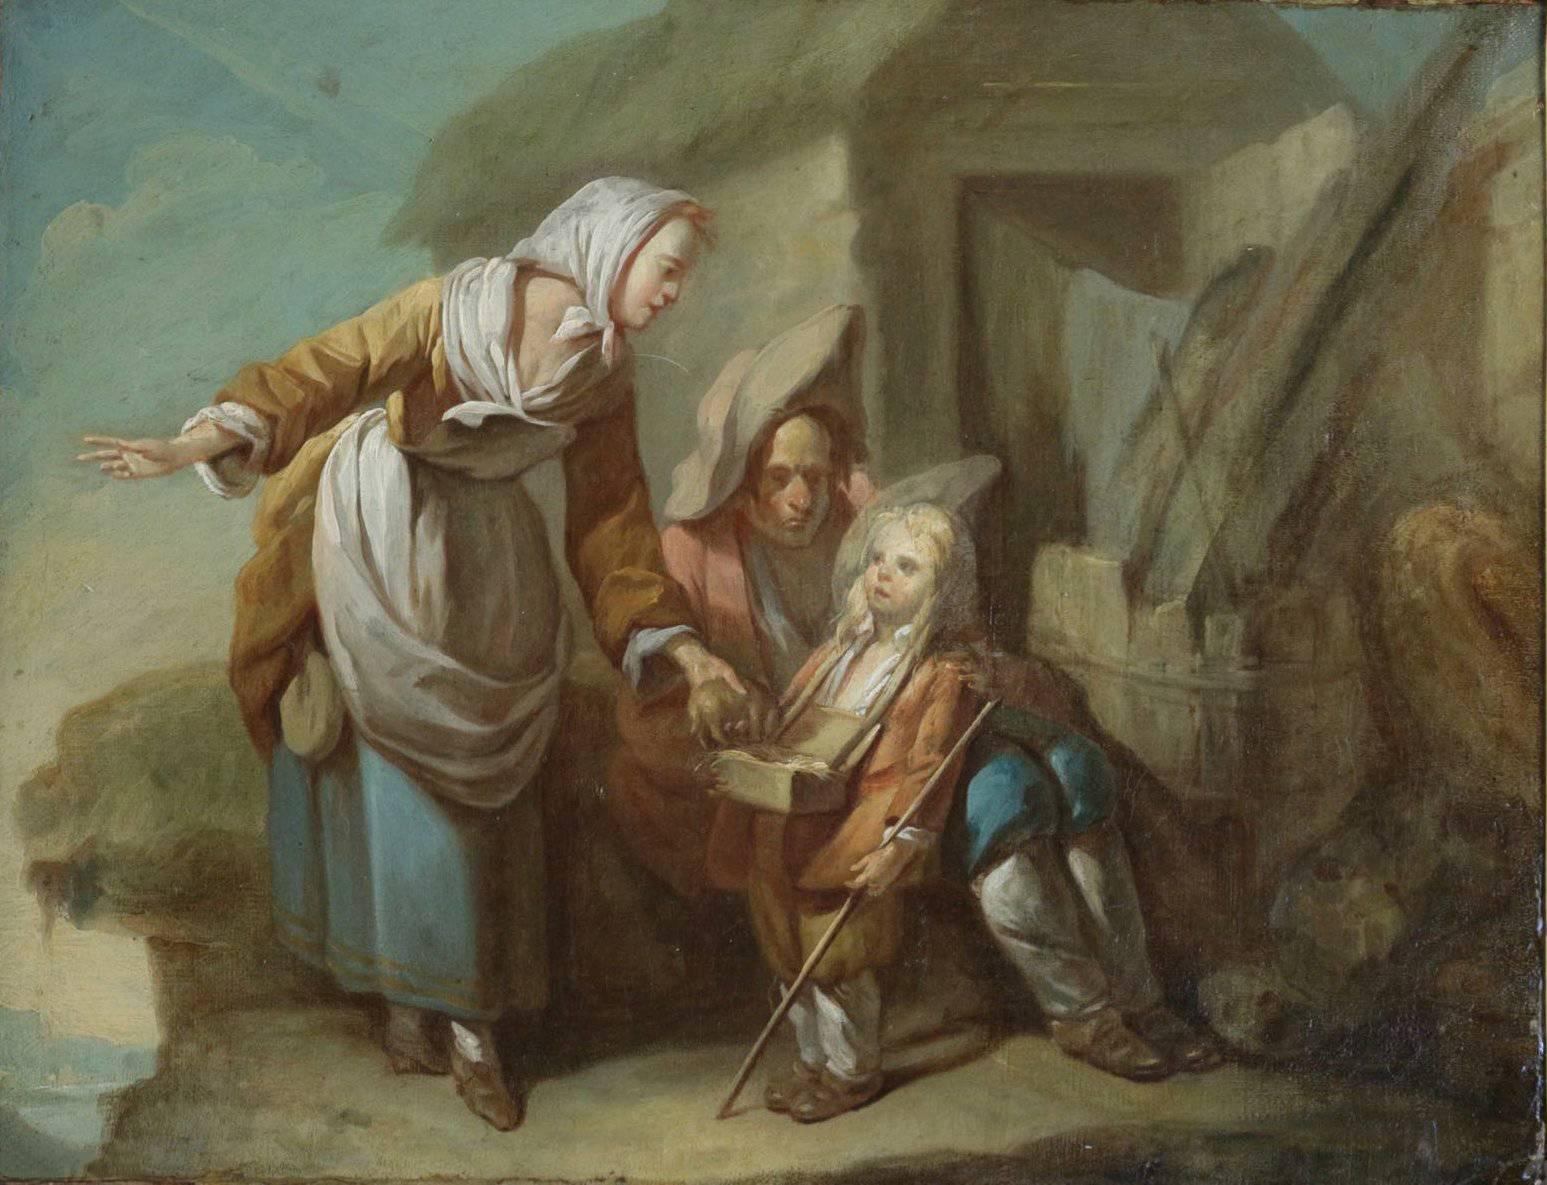 Romantic French School Late 18th Century Oil on Canvas ''The Departure'', circa 1790